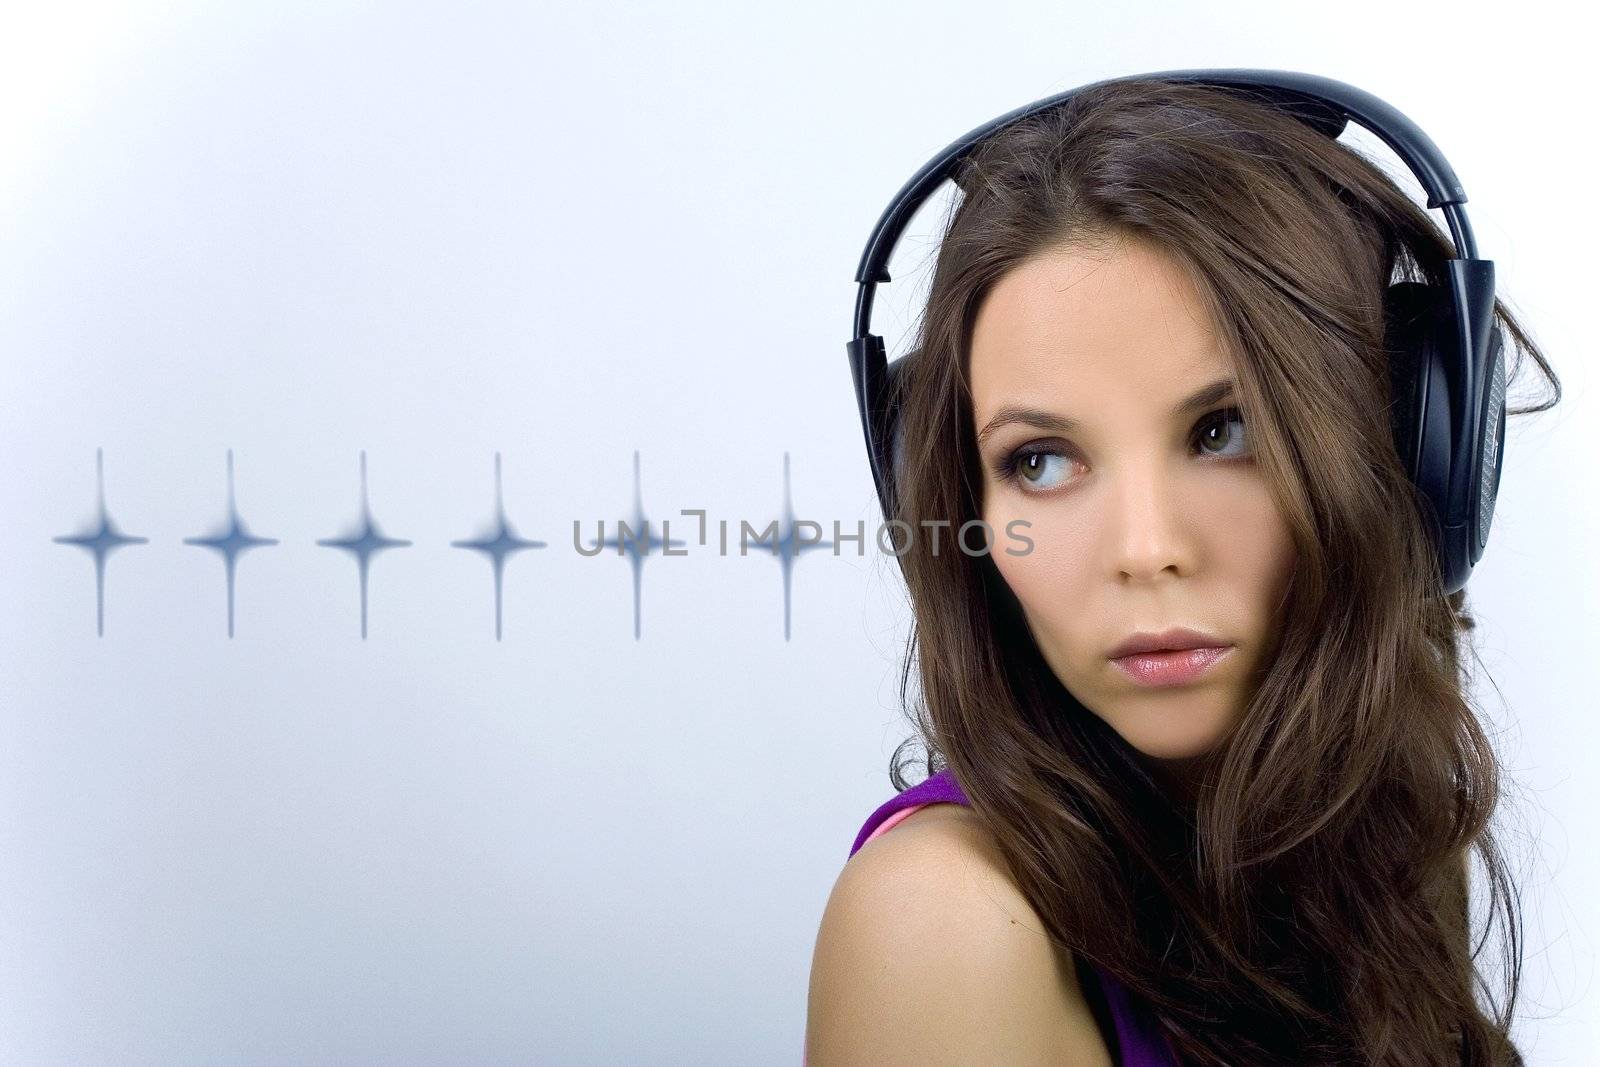 Young dj girl in club clothes with headphones on background with stars